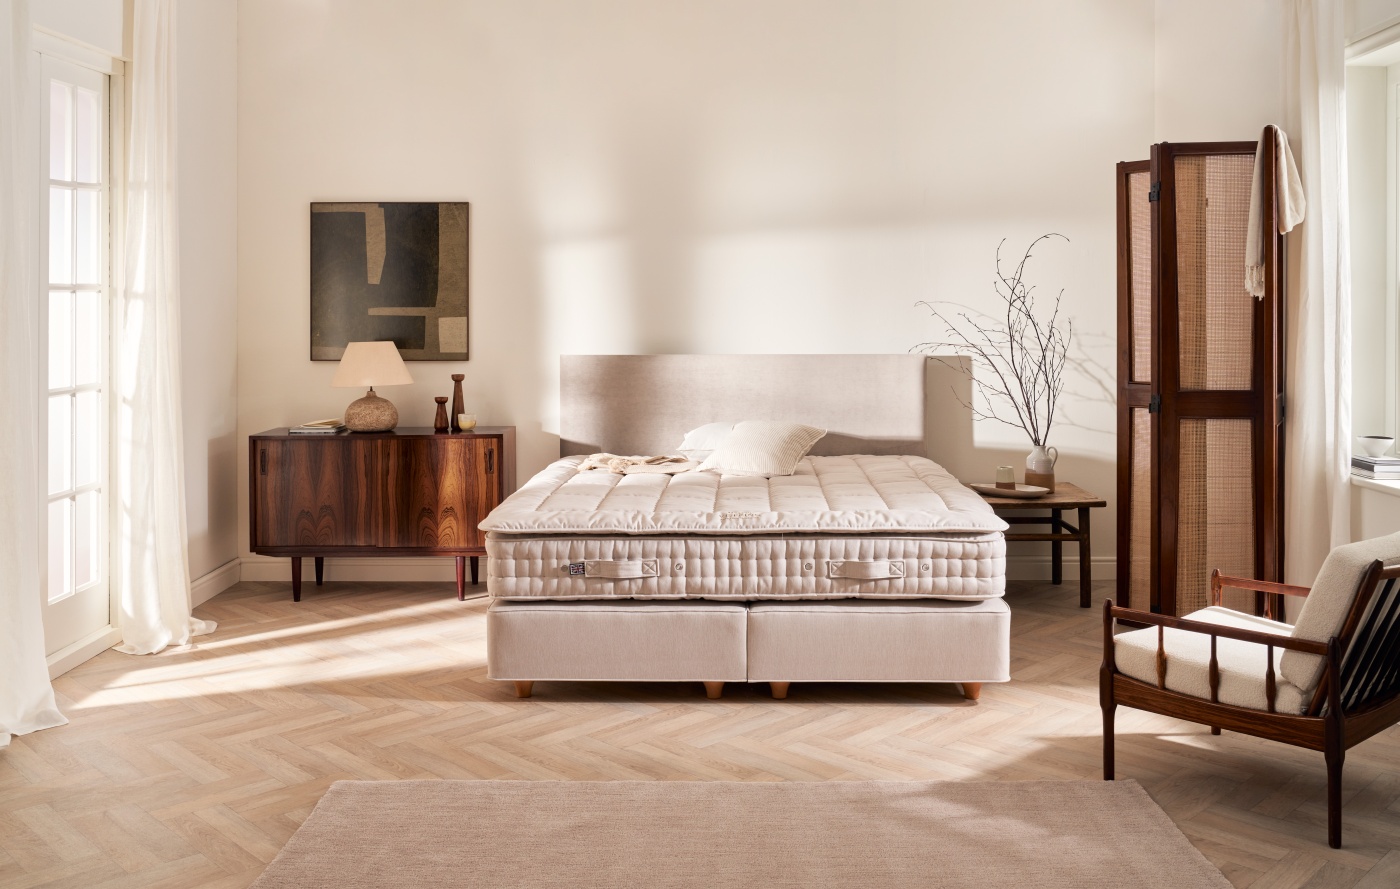 Discover the luxury comfort of Vispring beds